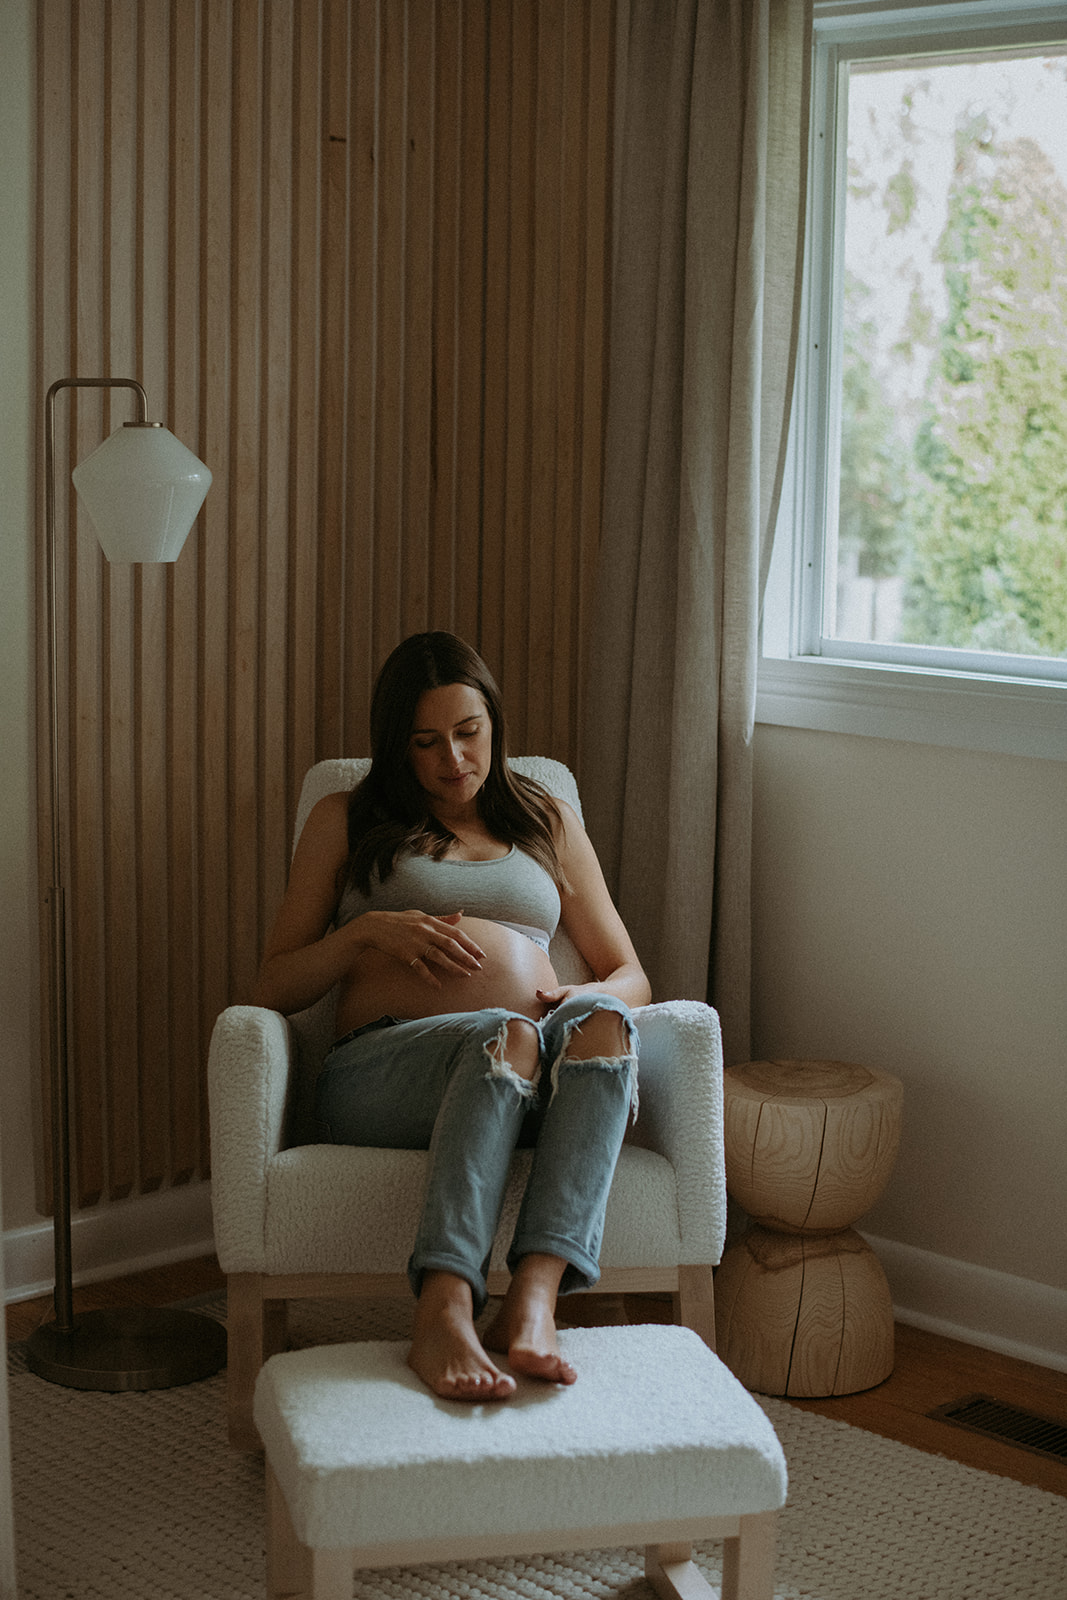 Woman gazes down at her pregnant belly for maternity photos in the nursery